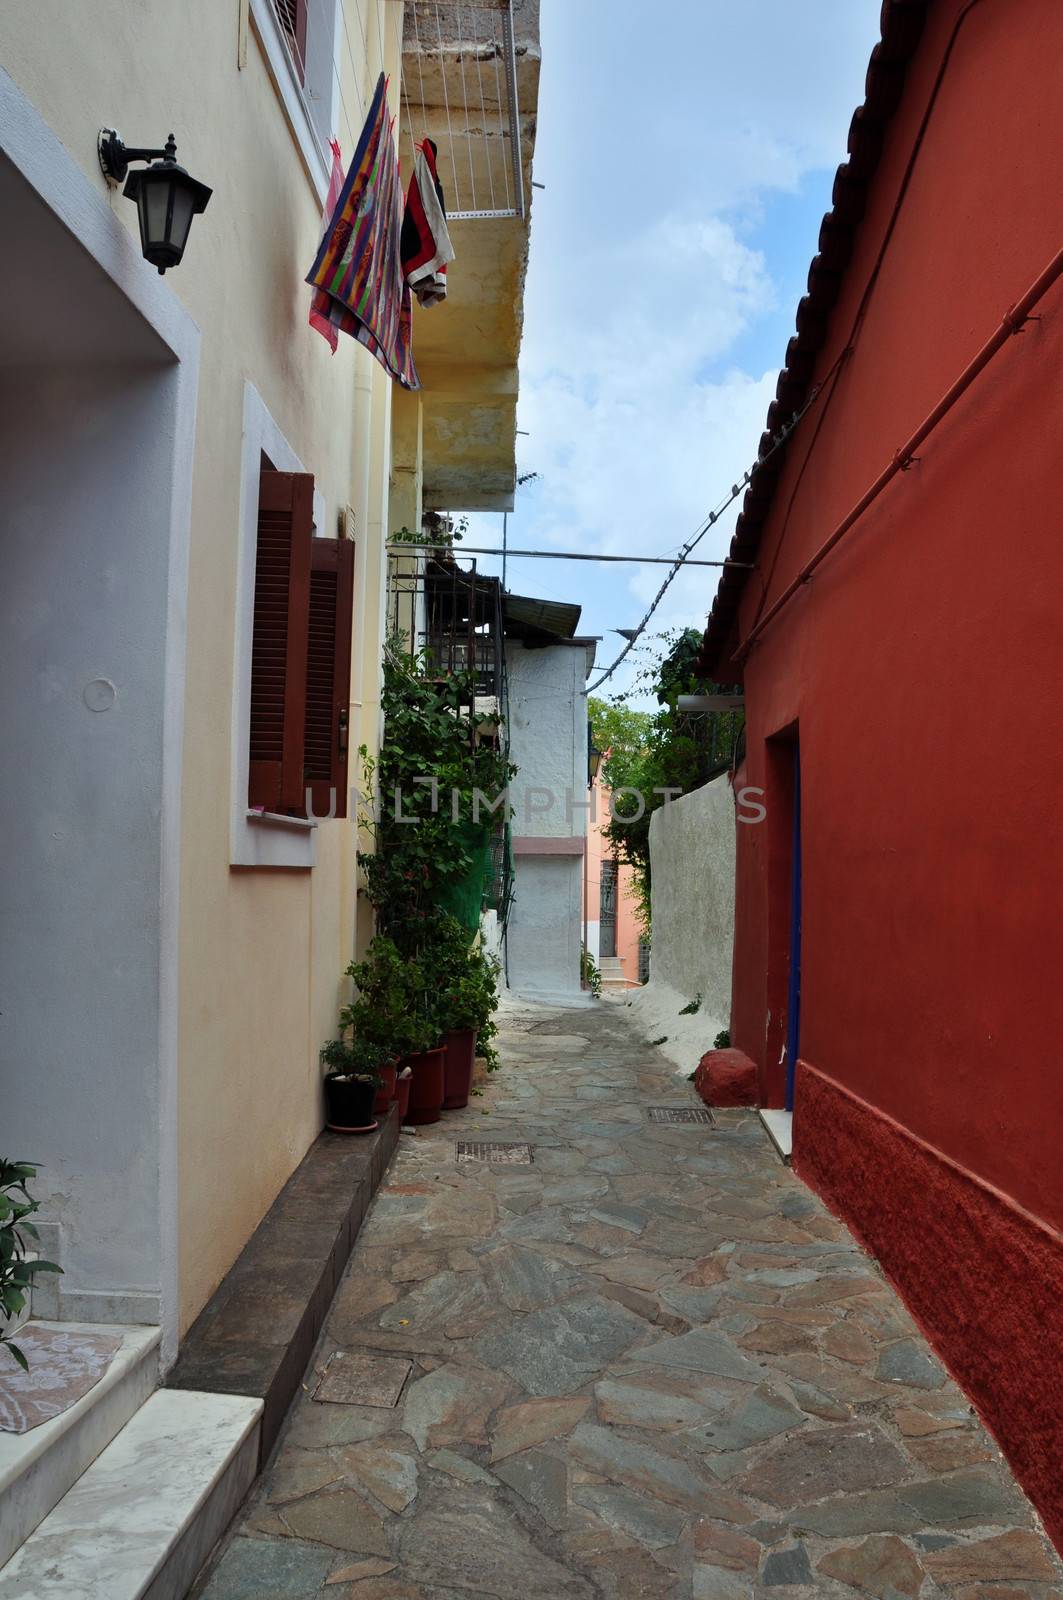 Traditional houses and narrow alley in Plaka, Athens Greece.